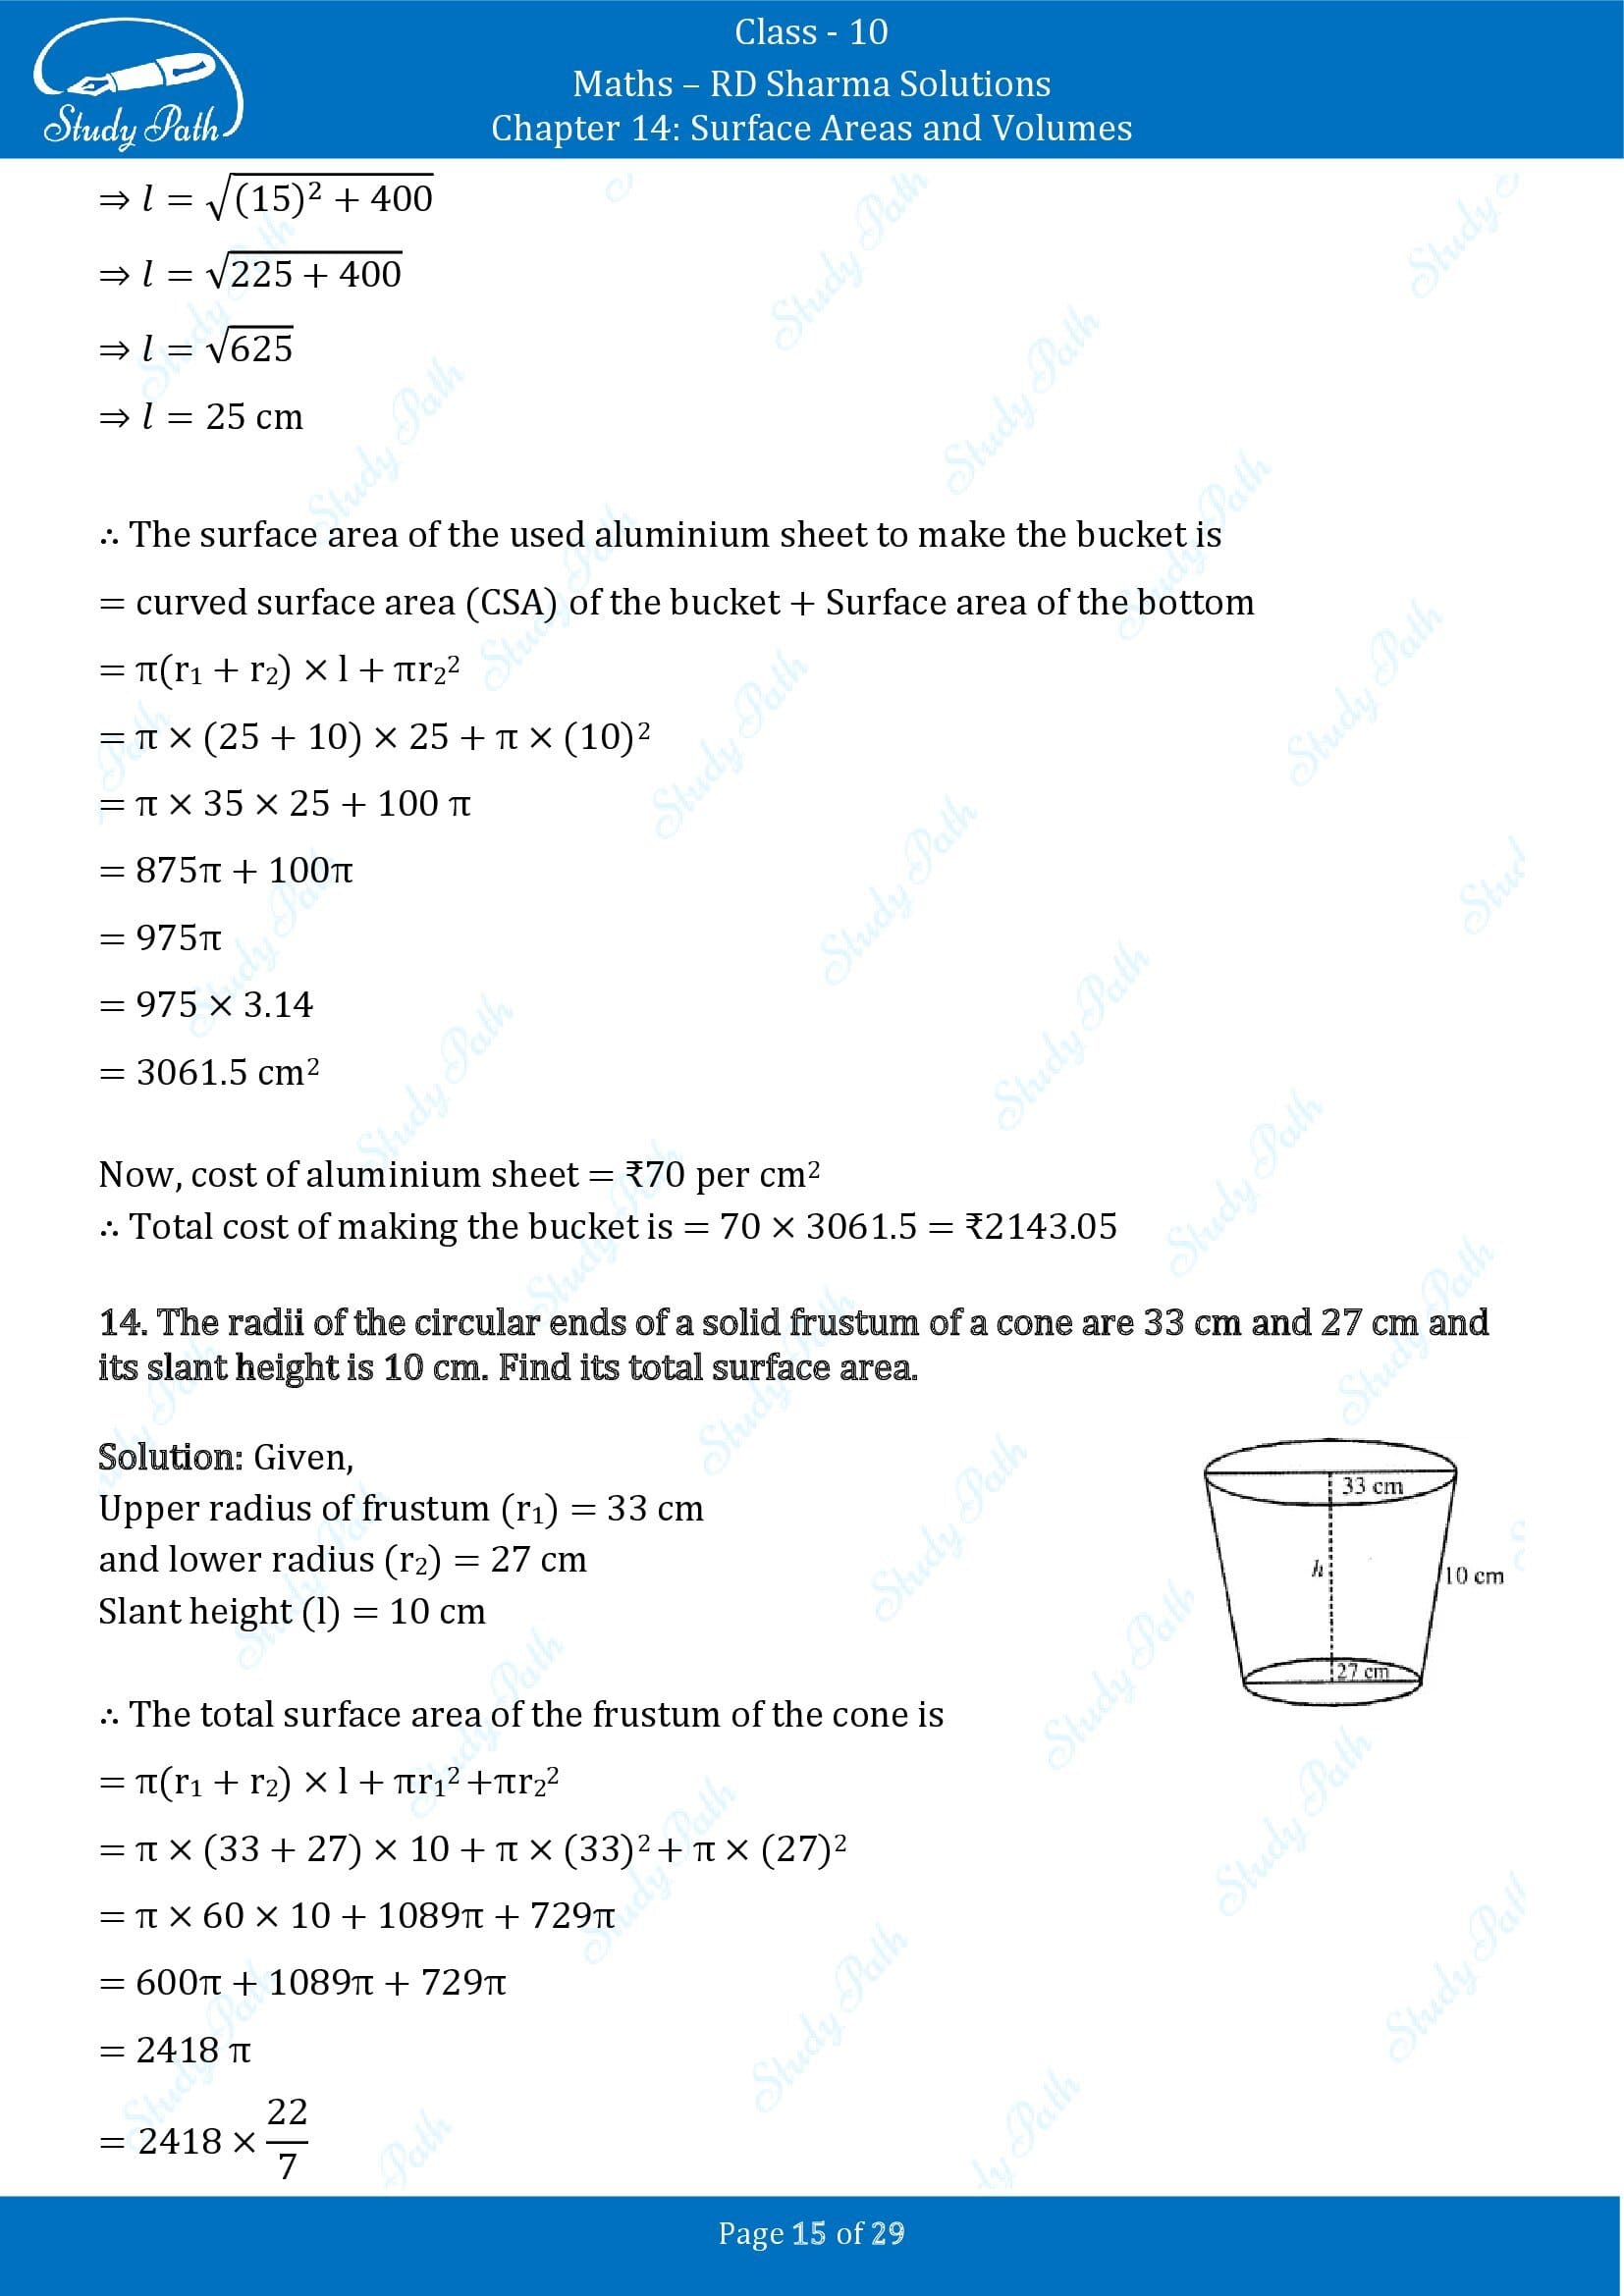 RD Sharma Solutions Class 10 Chapter 14 Surface Areas and Volumes Exercise 14.3 00015